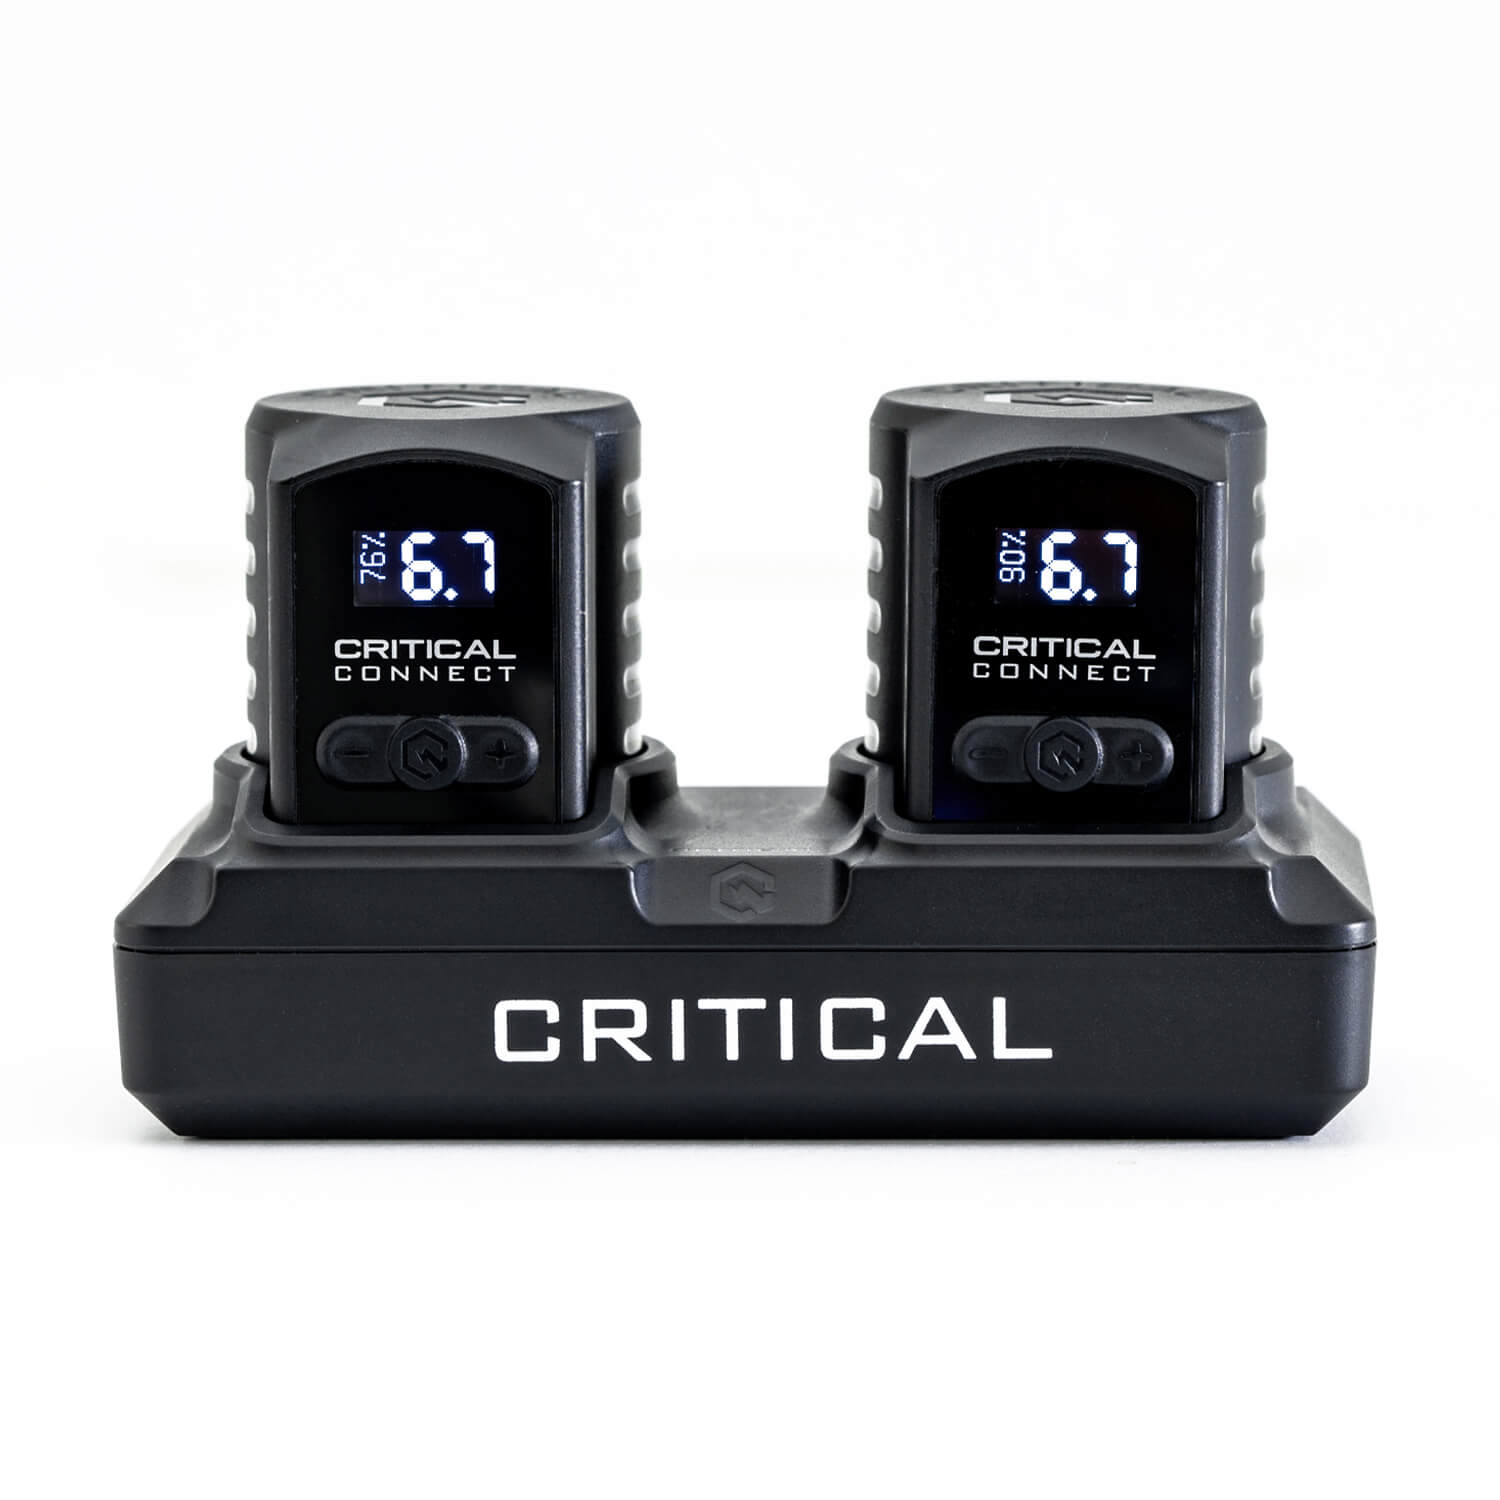 A Critical Connect Universal Battery Shorty and Dock Bundle. Critical tattoo power supplies are available at TATSoul.